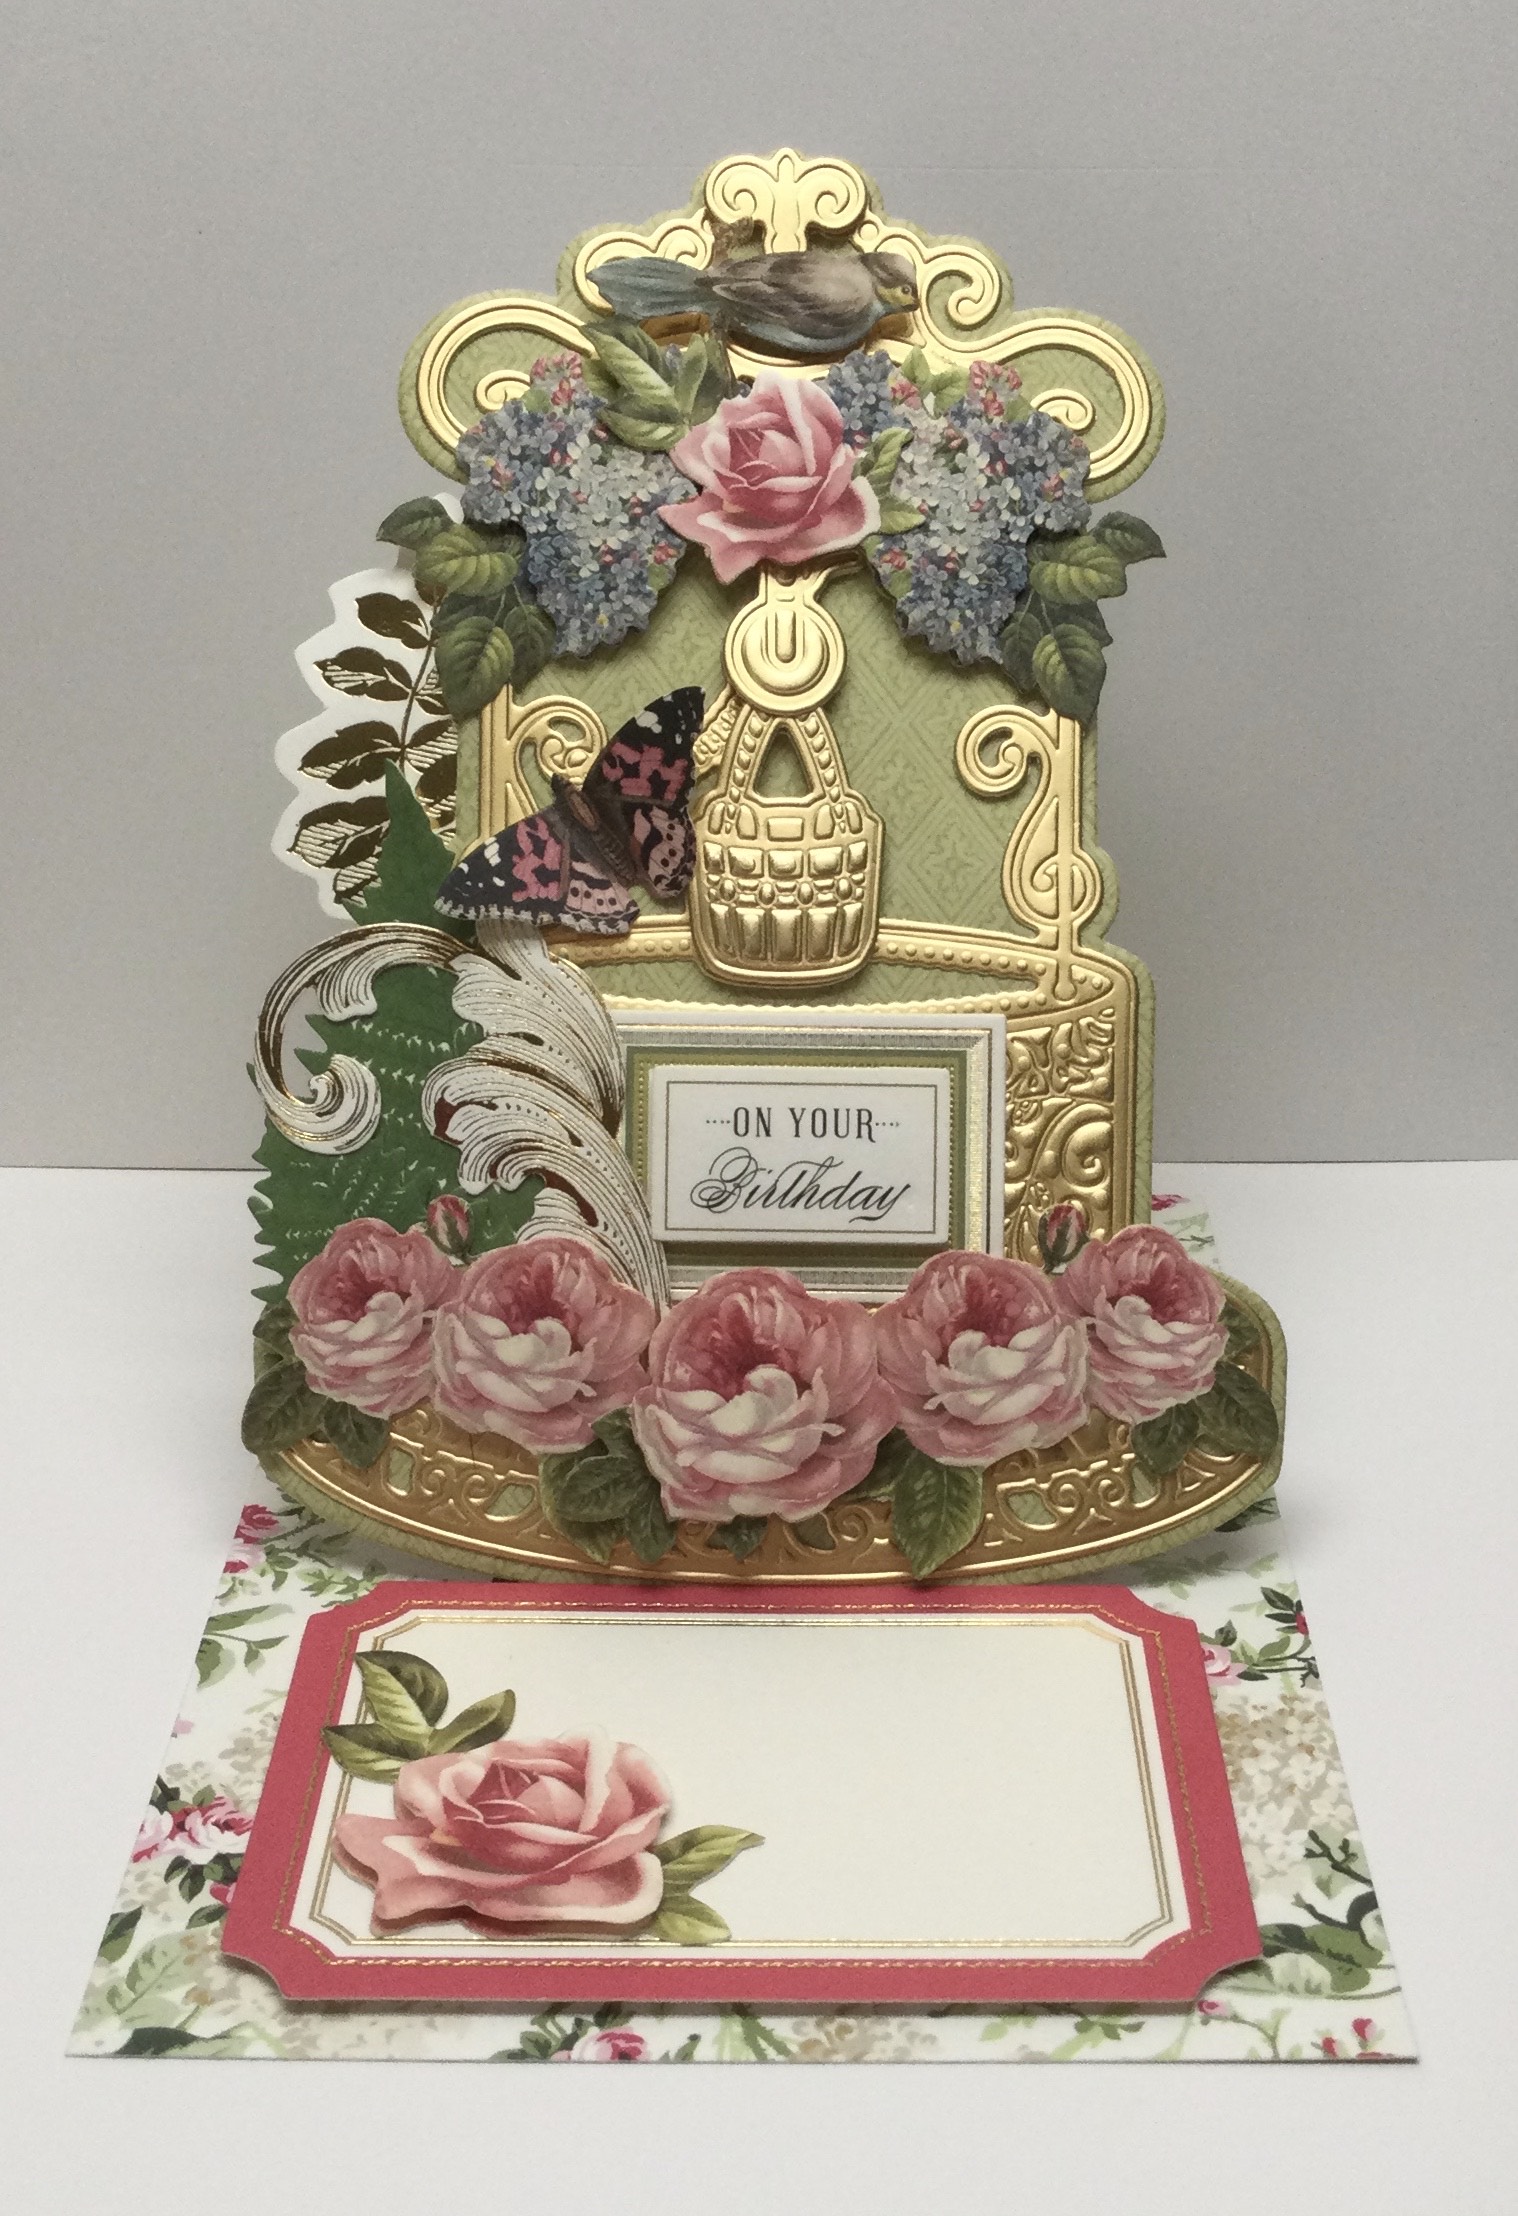 A pop up card with flowers and a clock.